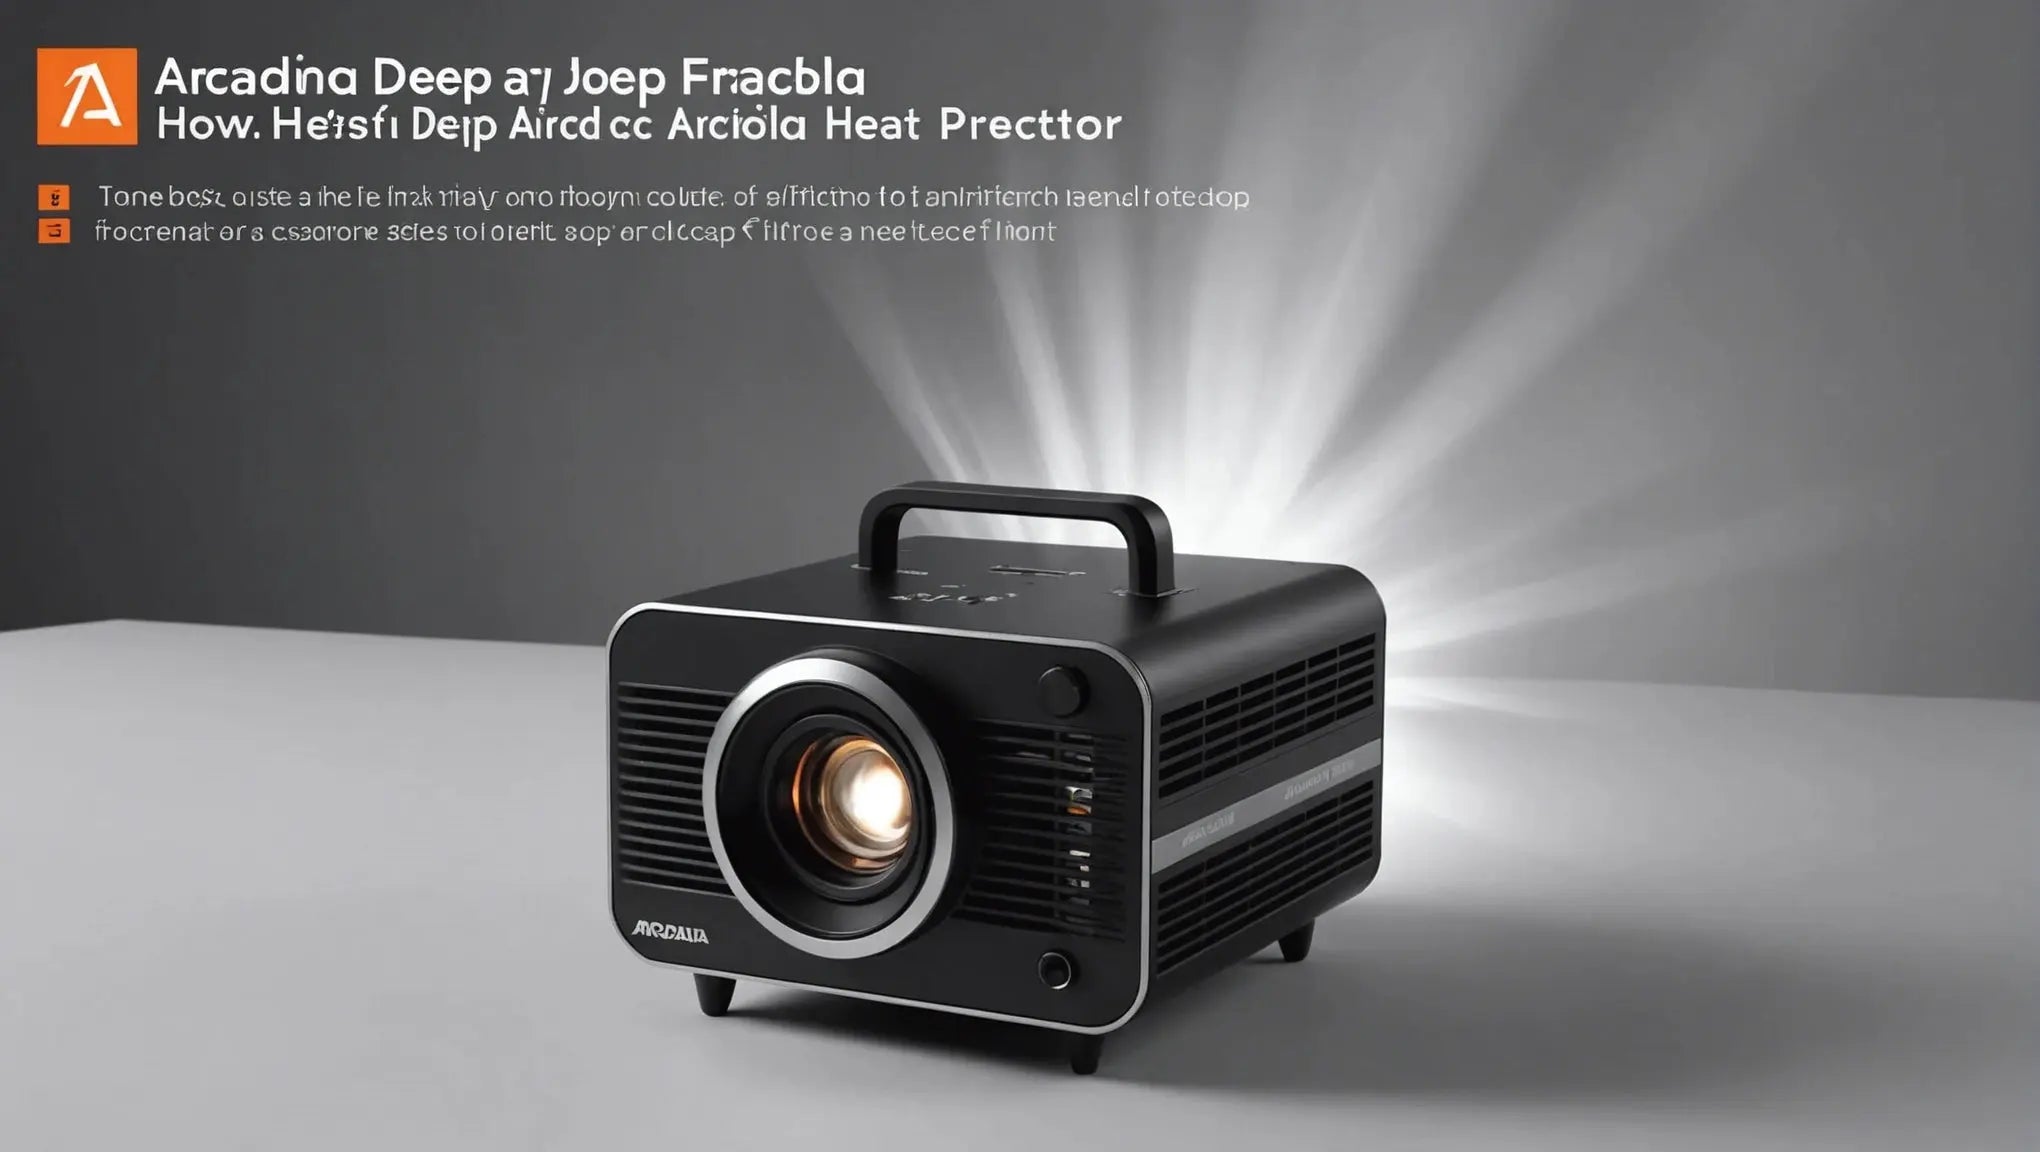 How to Use Arcadia Deep Heat Projector: A Step-by-Step Guide